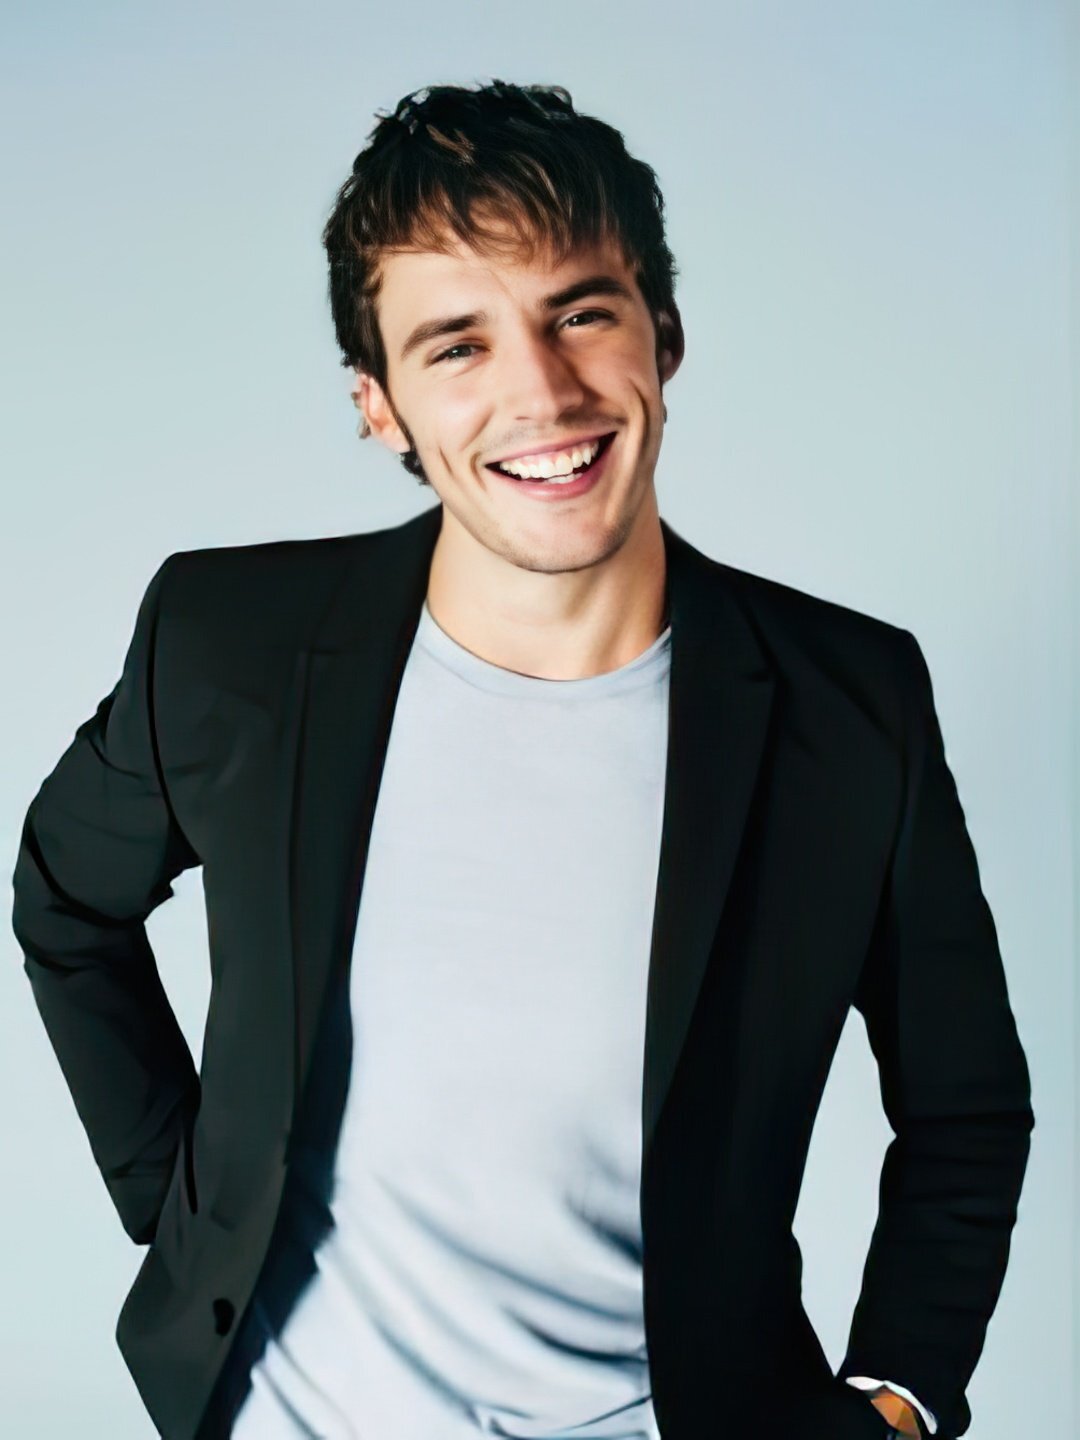 Sam Claflin does he have a wife